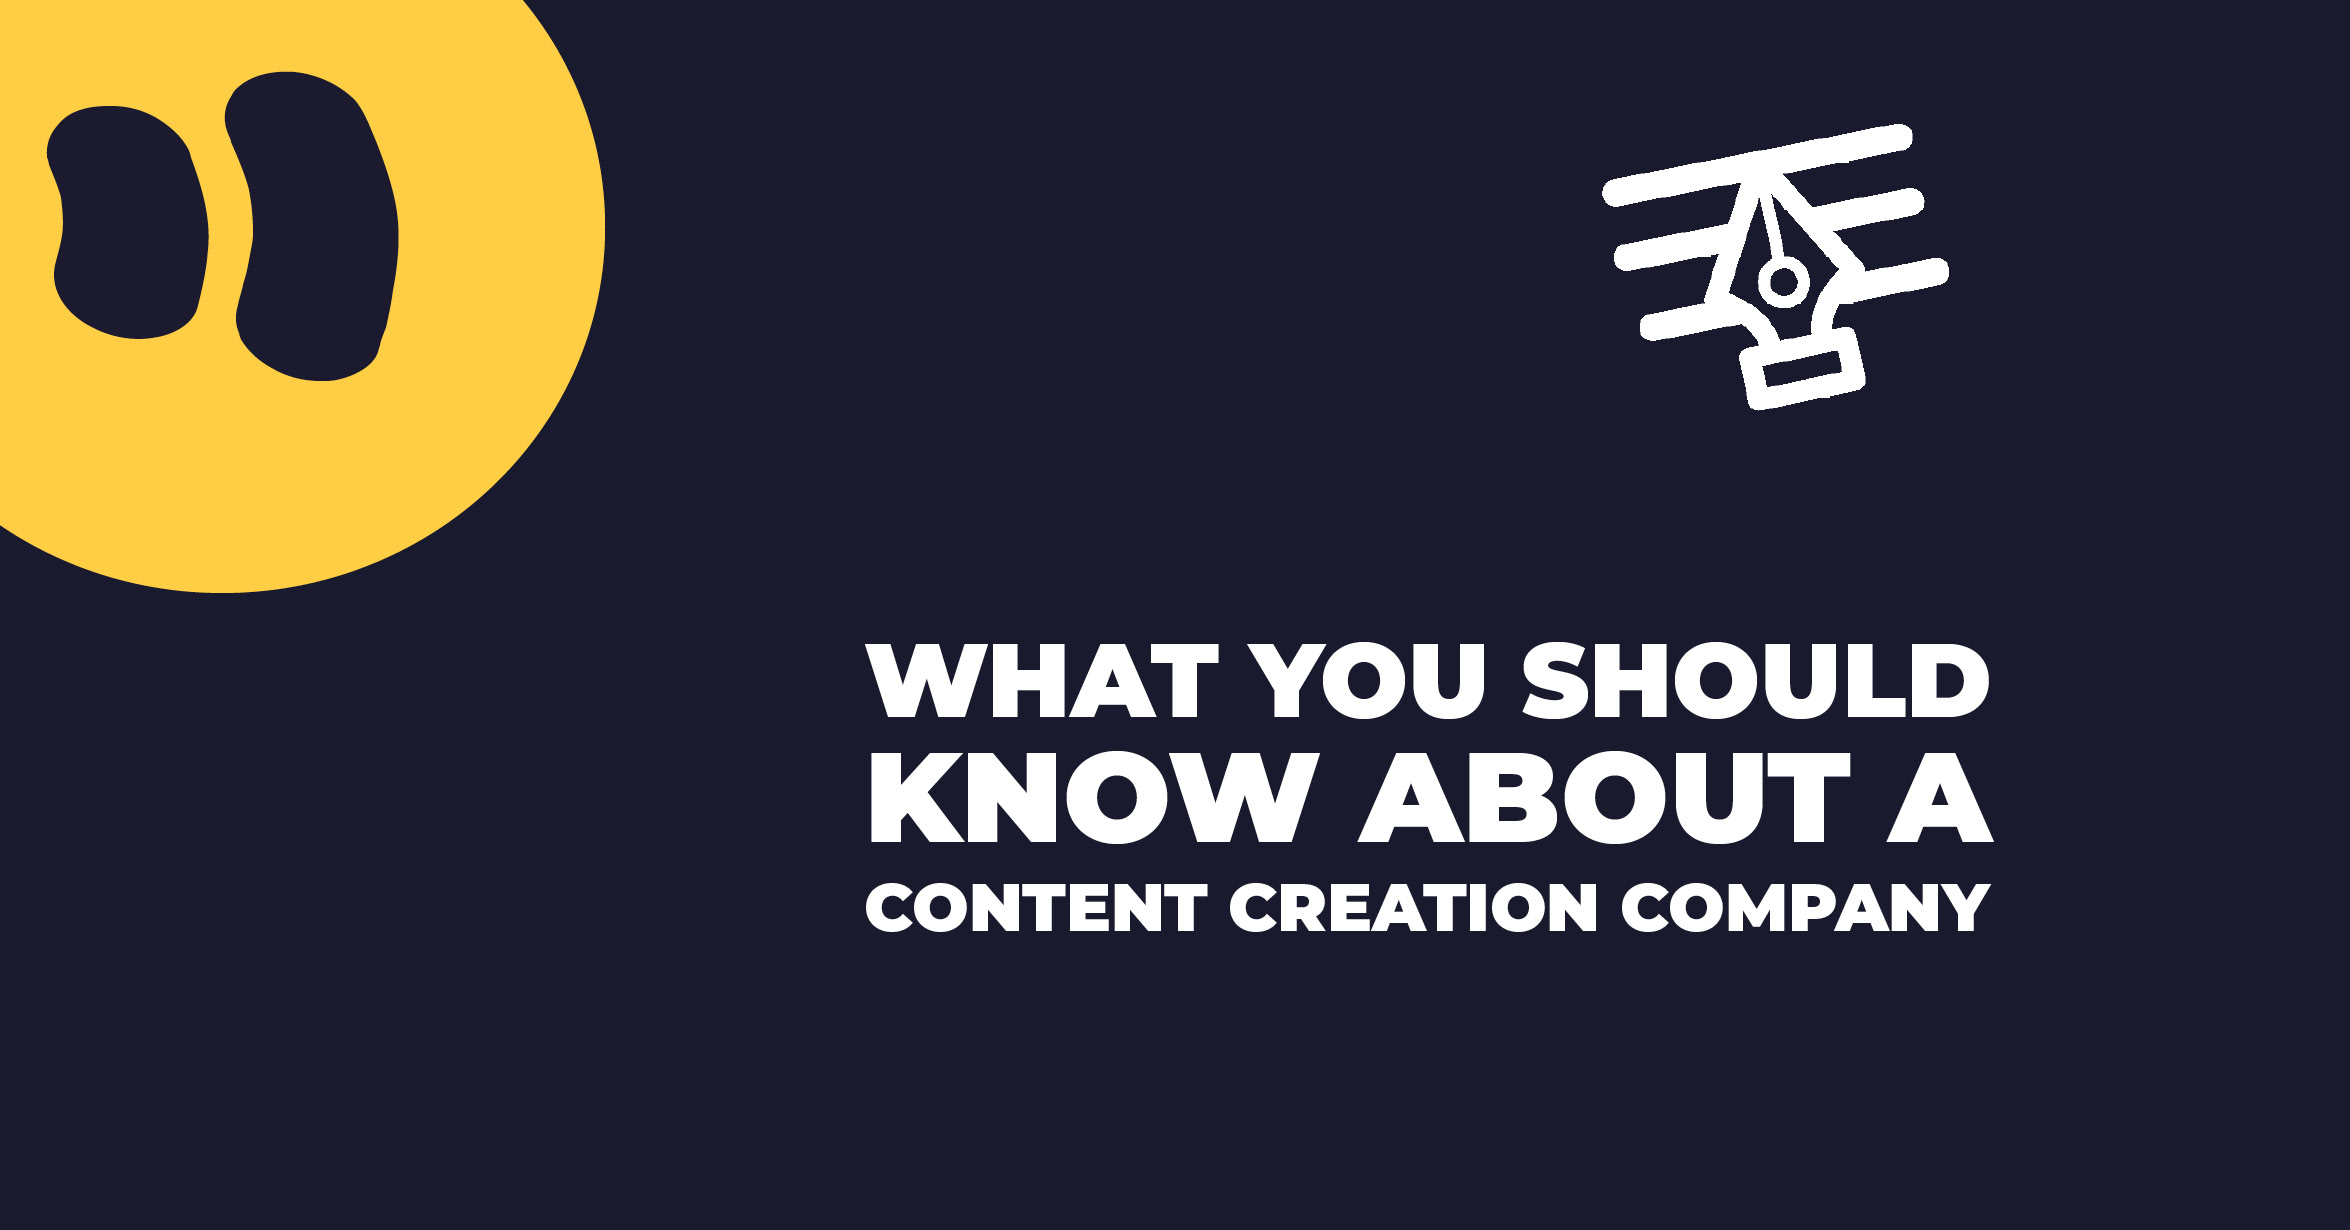 What You Should Know About a Content Creation Company